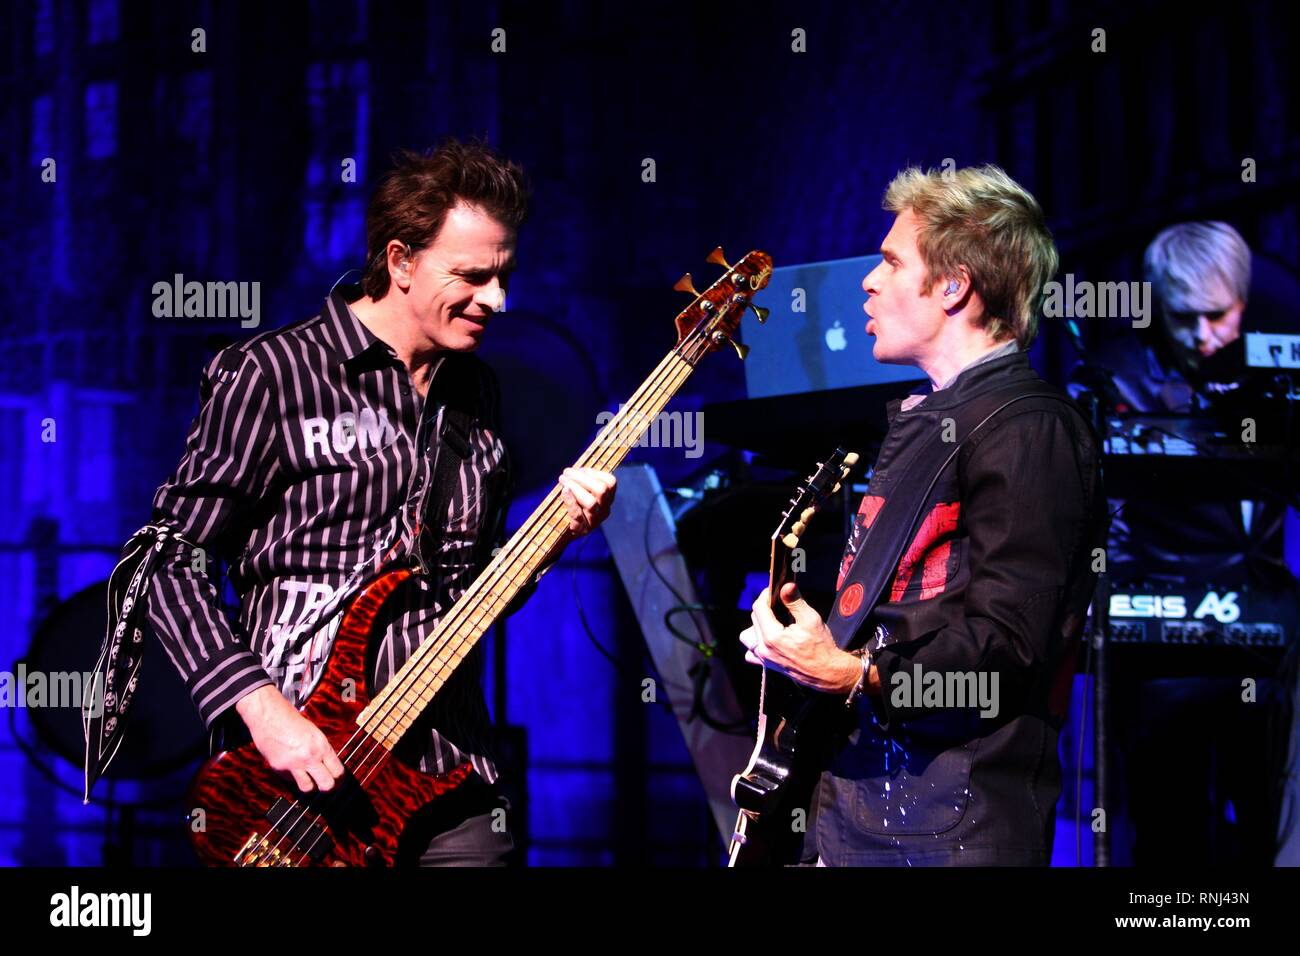 Duran Duran band members are shown performing on stage during a 'live' concert appearance. Stock Photo